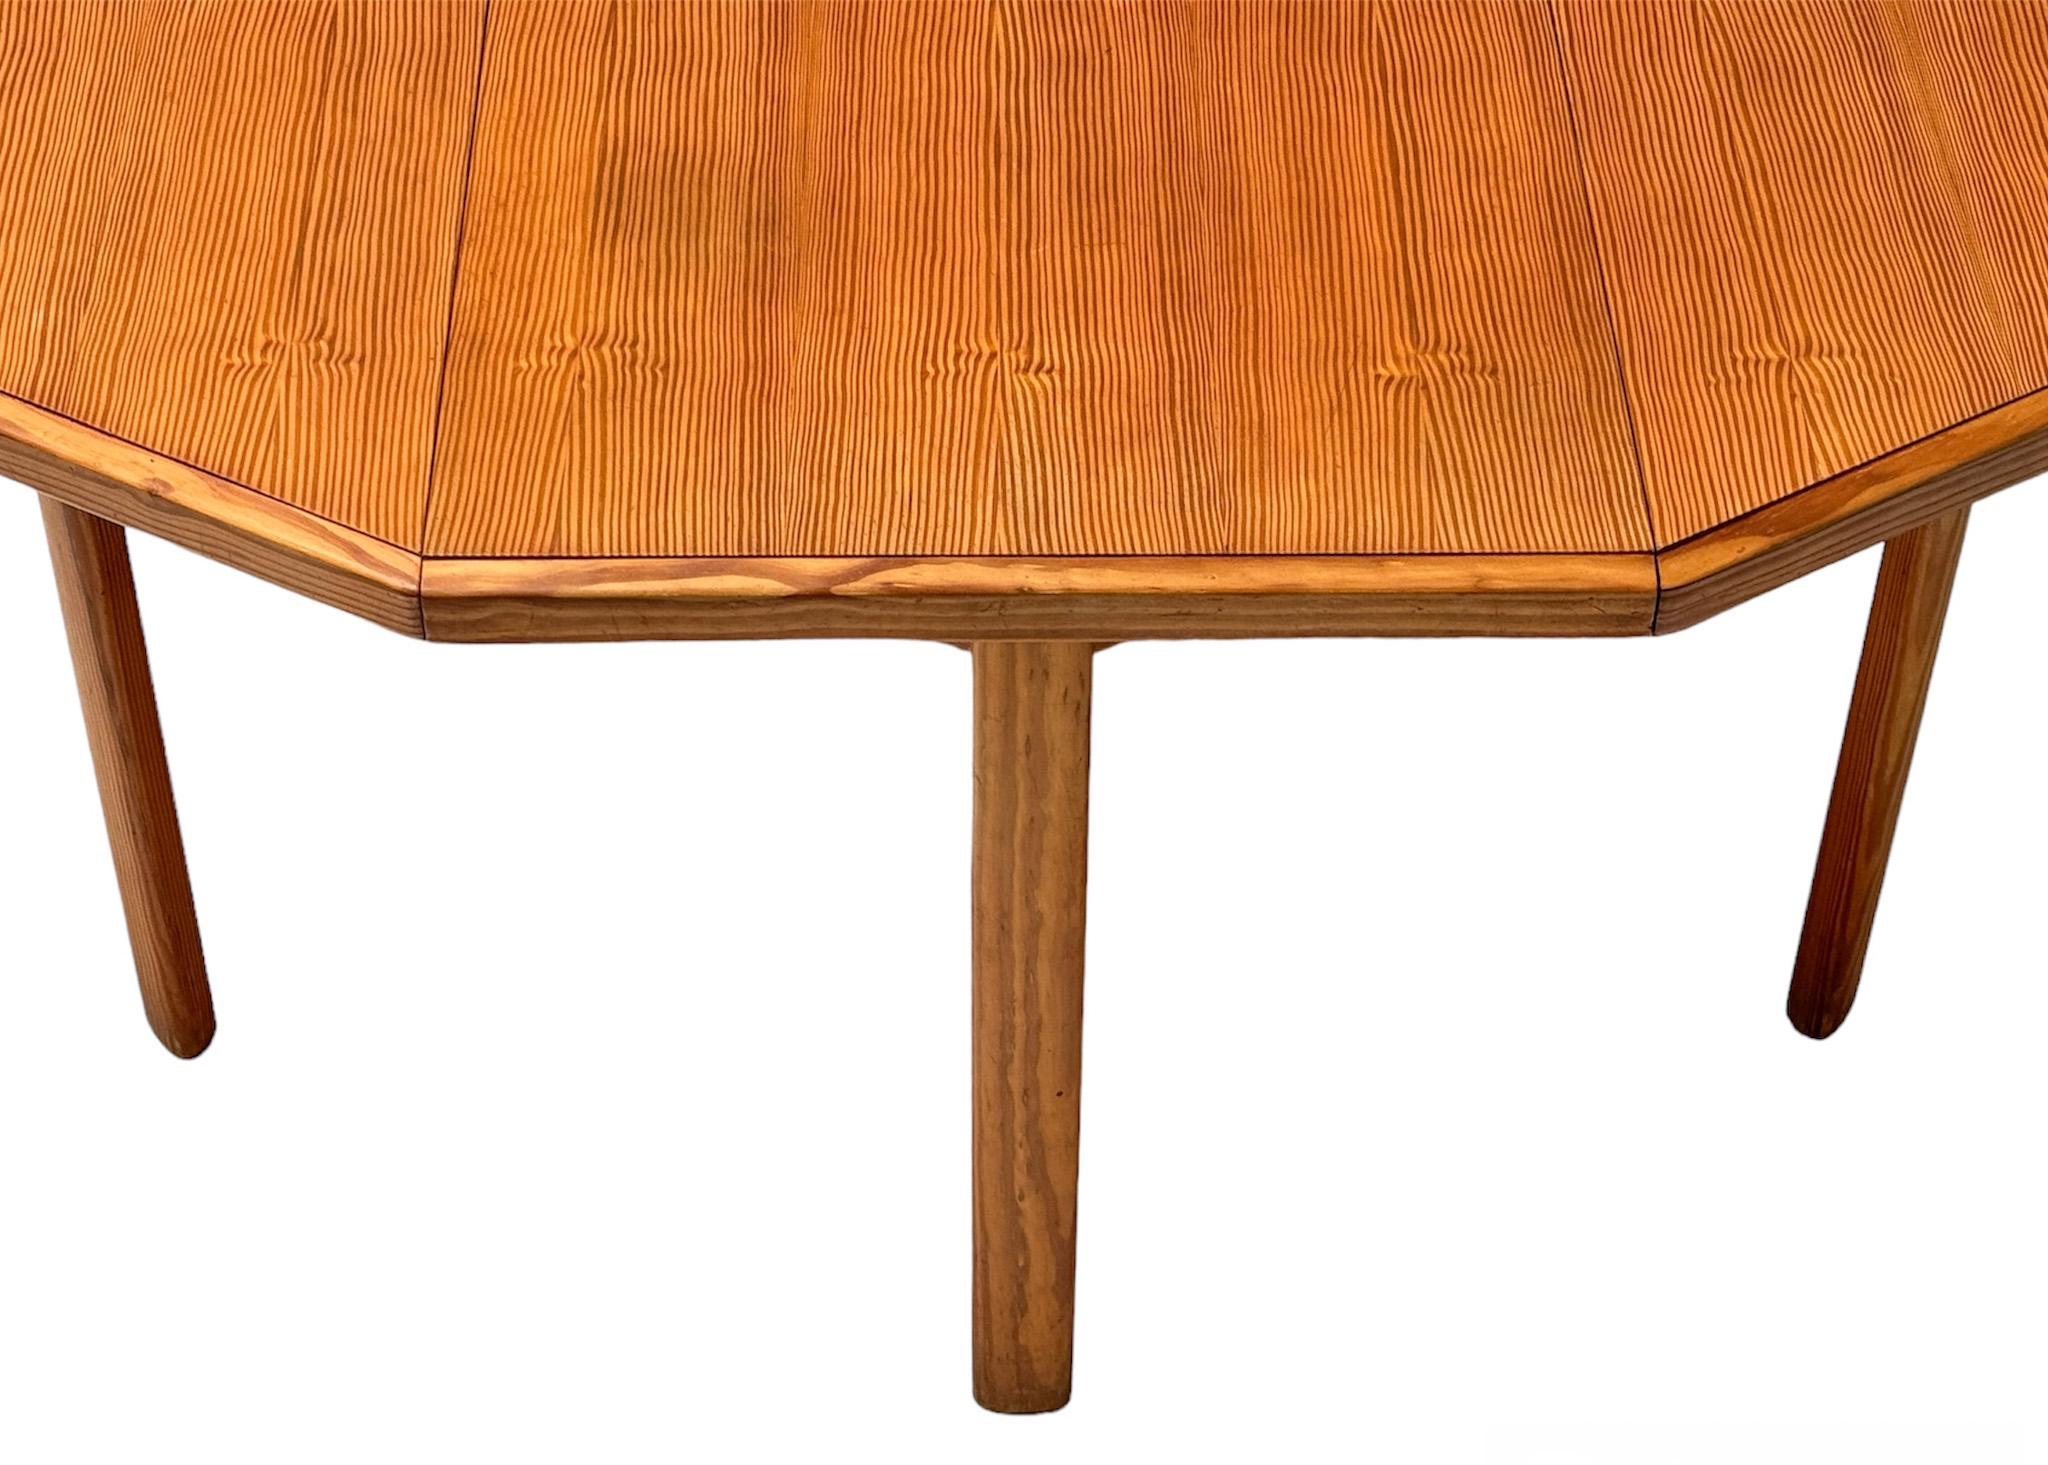 French Pine Mid-Century Modern Extendable Dining Room Table, 1970s For Sale 8